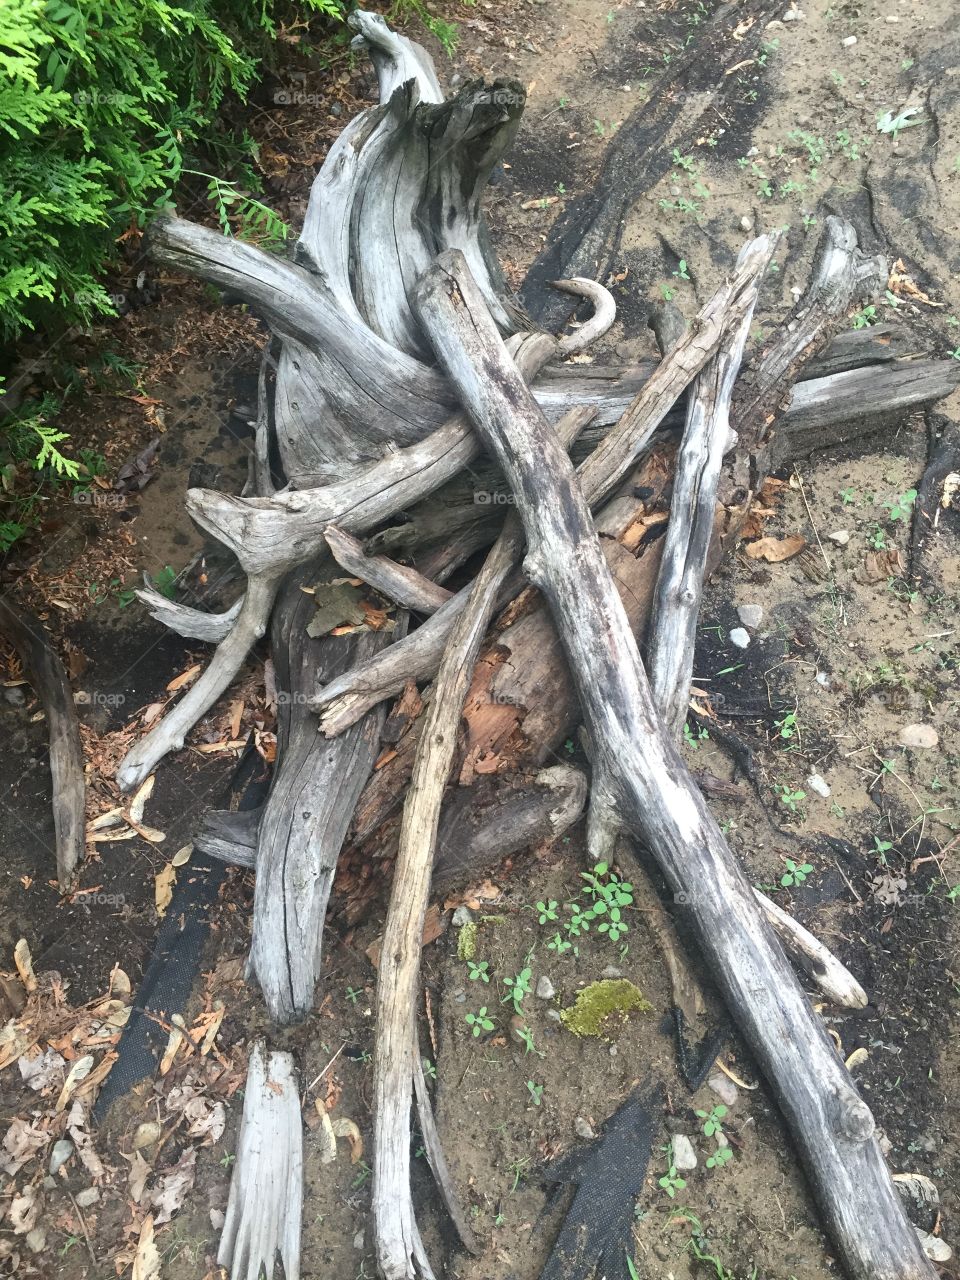 This is just a pile of dead wood